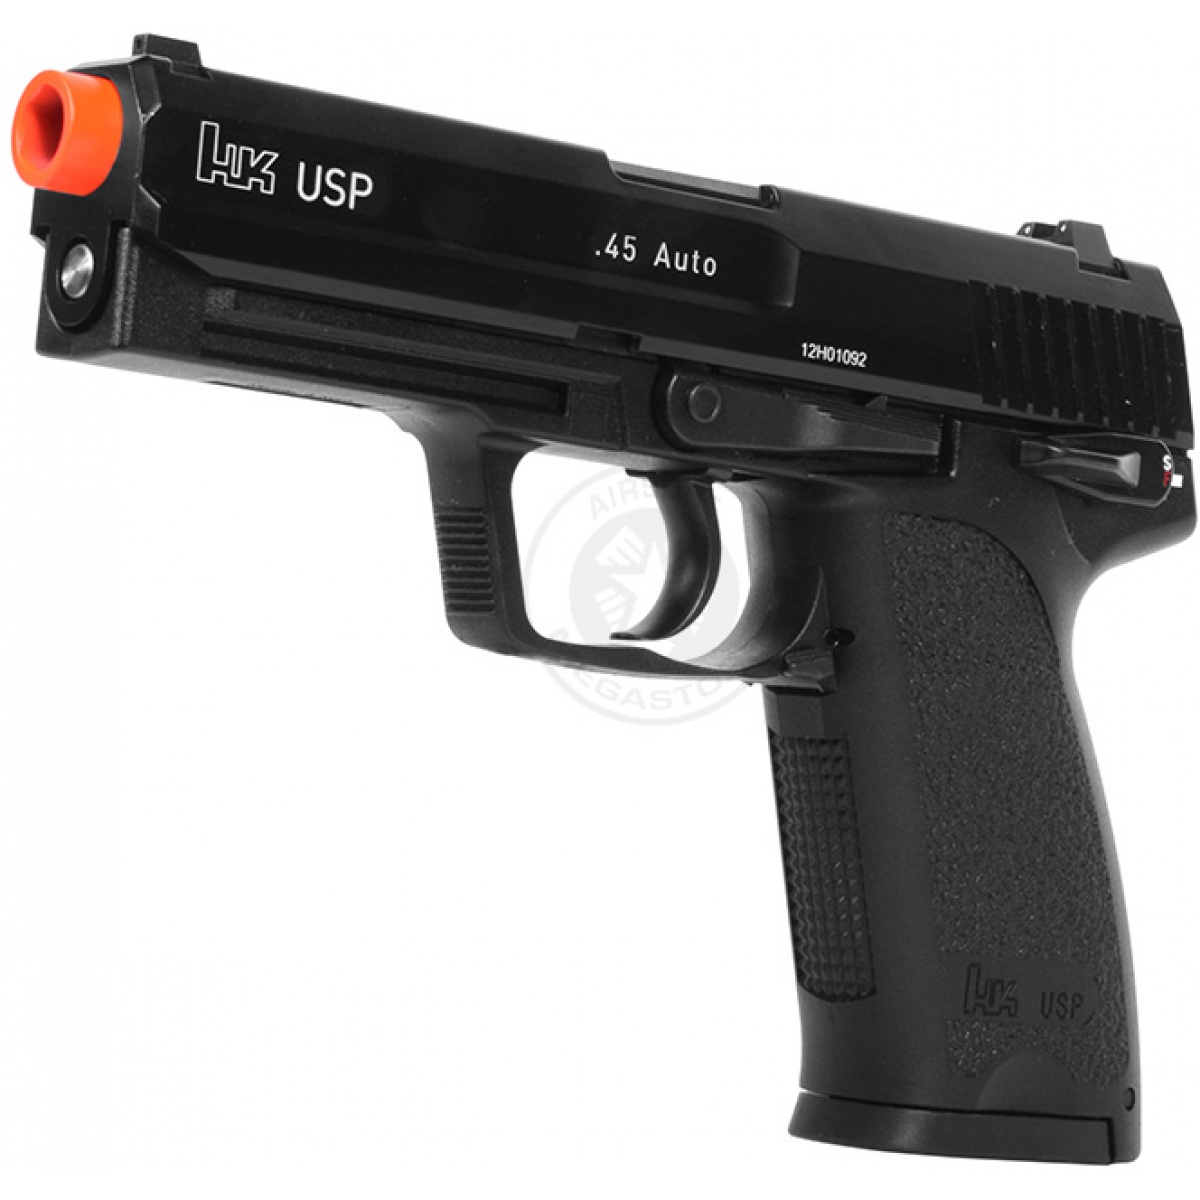 Elite Force KWA H&K USP Compact Gas Blowback GBB Airsoft Pistol